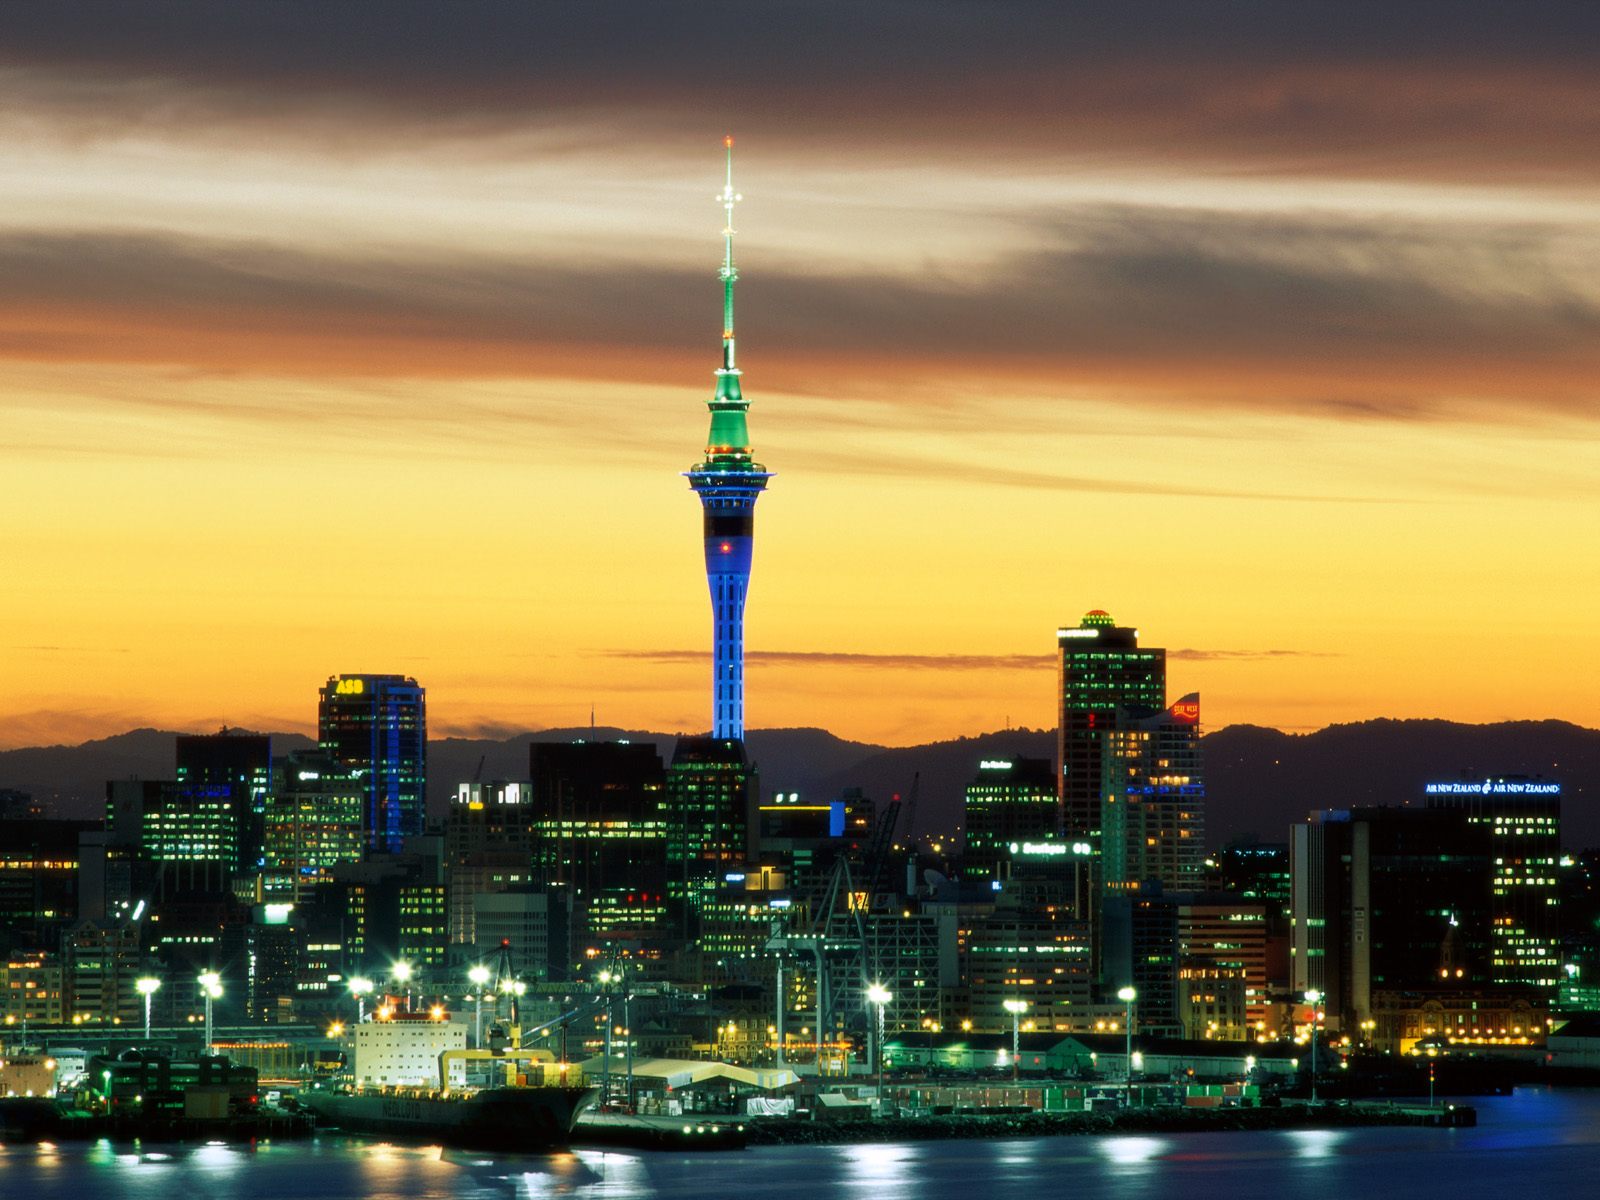  New Zealand Auckland 2013 hd Wallpaper and make this wallpaper for